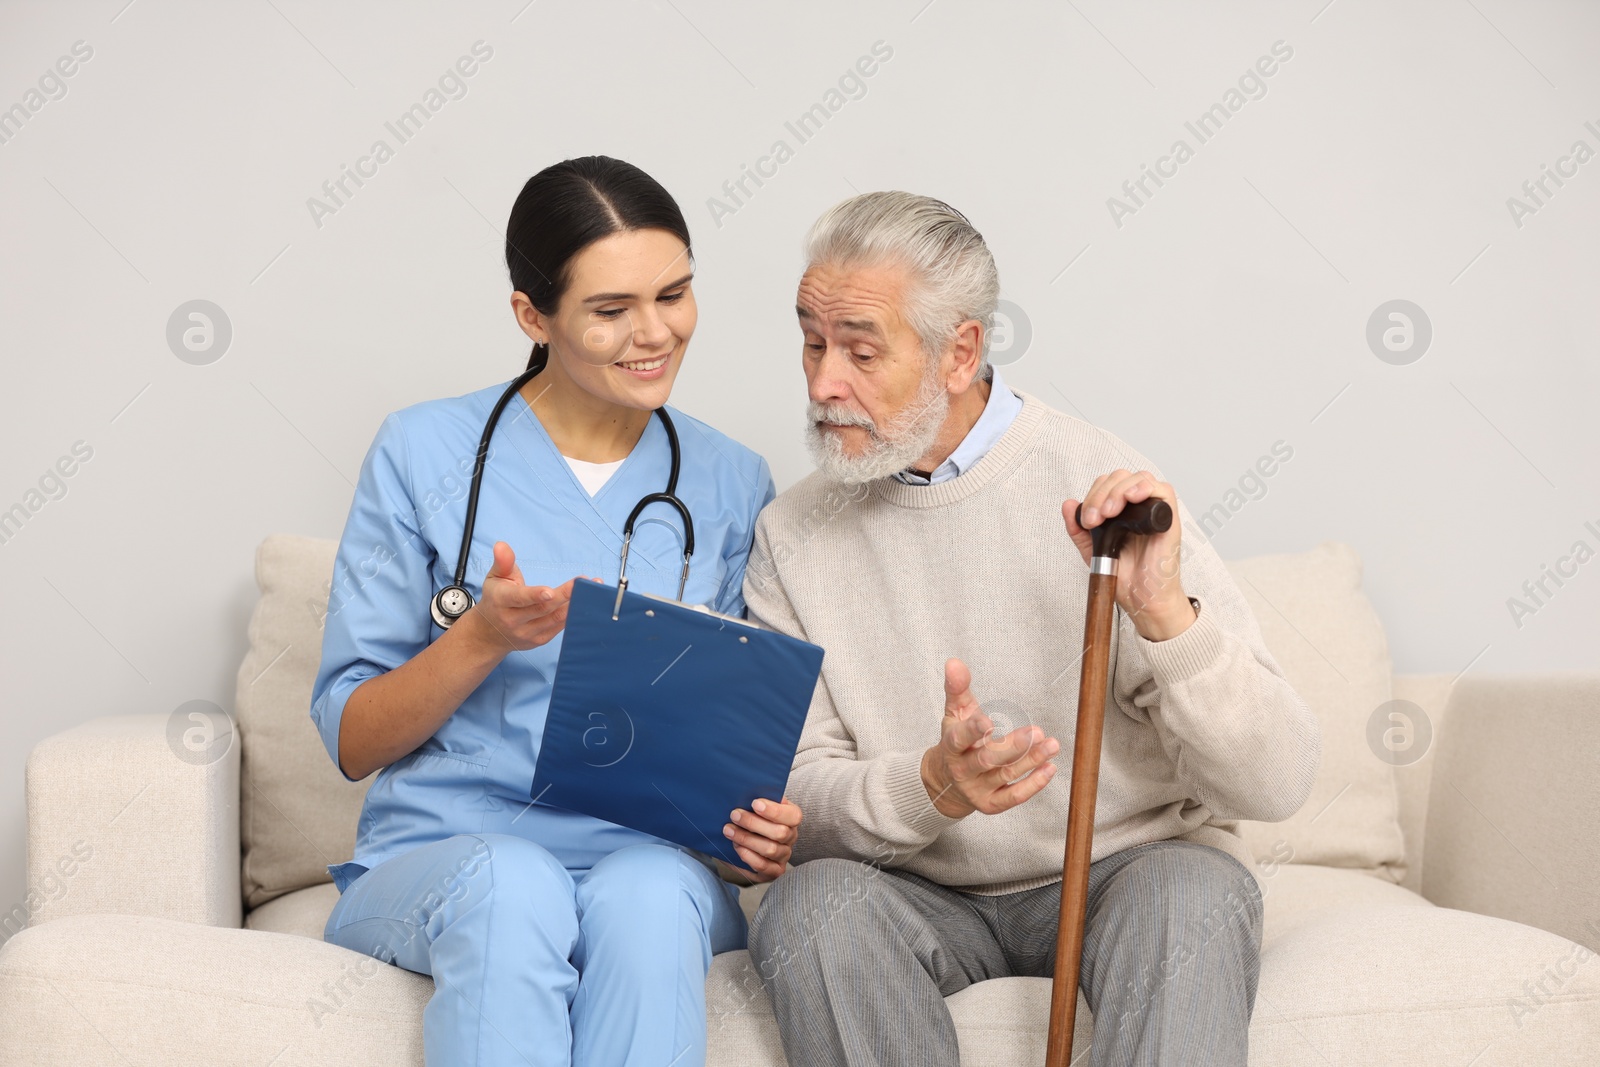 Photo of Smiling nurse with clipboard assisting elderly patient on sofa indoors